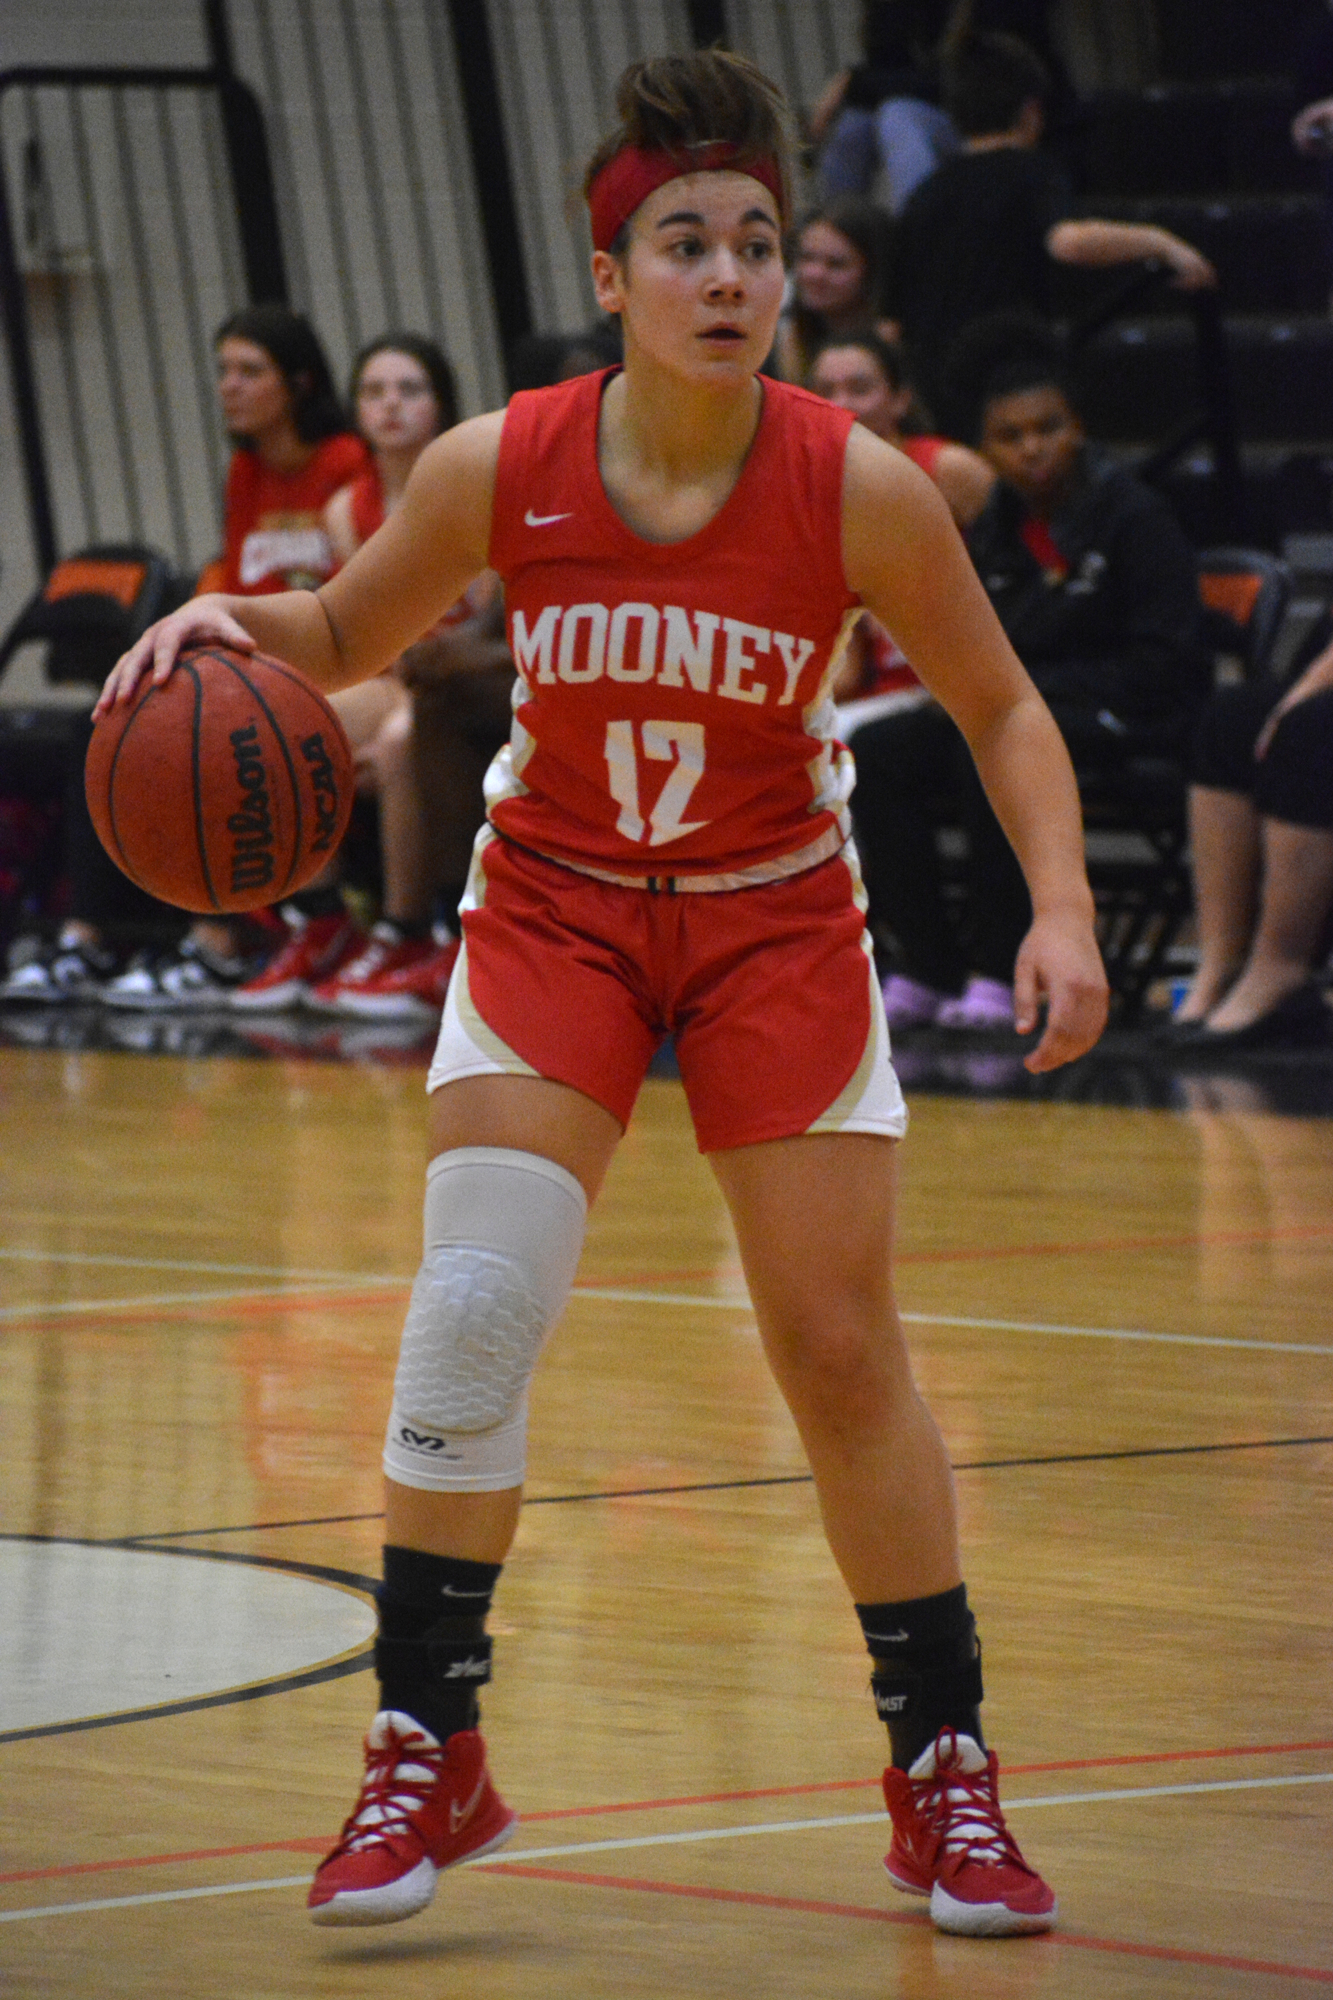 Cardinal Mooney junior Olivia Davis, who lives in Lakewood Ranch, is averaging 18.8 points per game for the state title-contending Cougars.